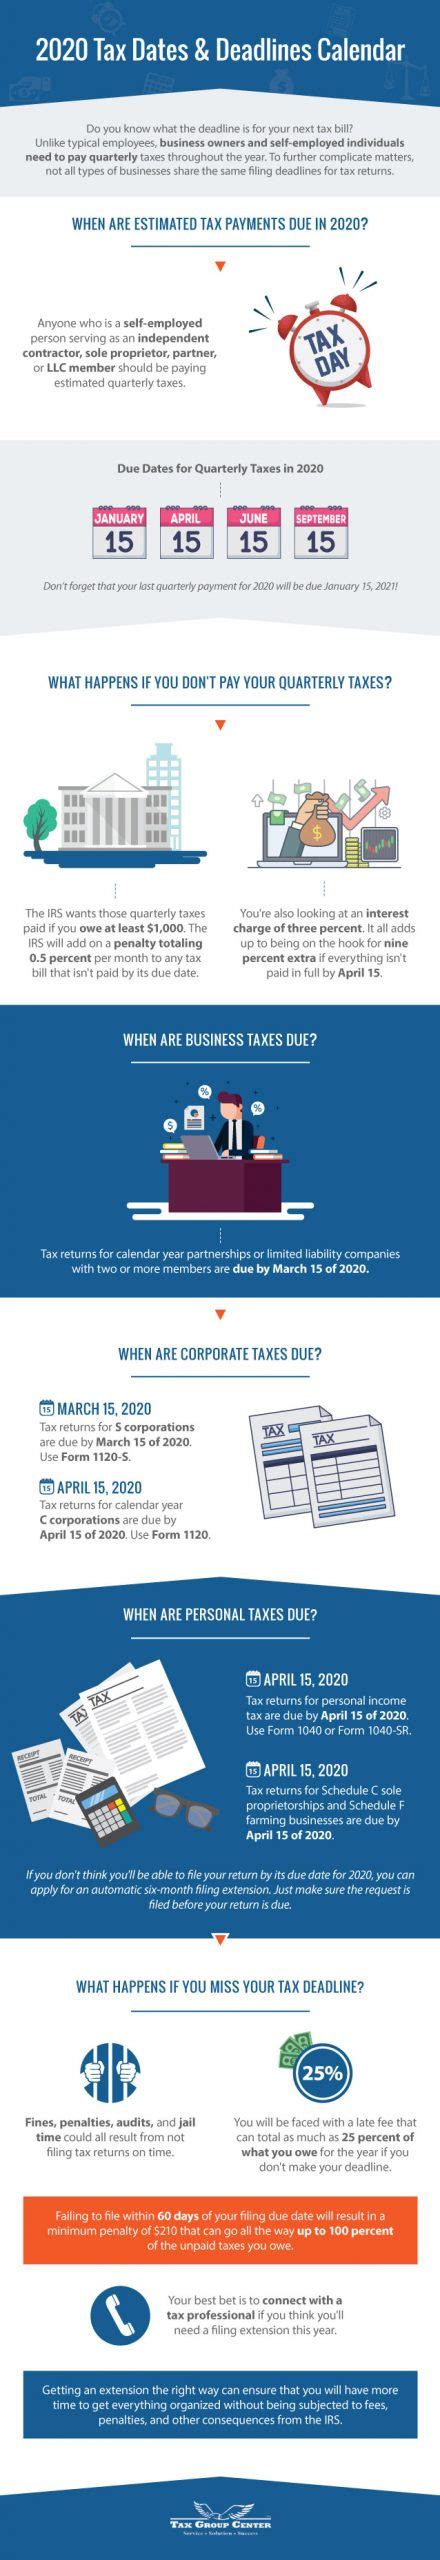 That would make your new filing deadline october 15th, 2020 — but keep in mind that extending the filing deadline is just that, and doesn't further extend your payment deadline. 2020 Tax Dates & Deadlines Calendar Infographic - Tax ...